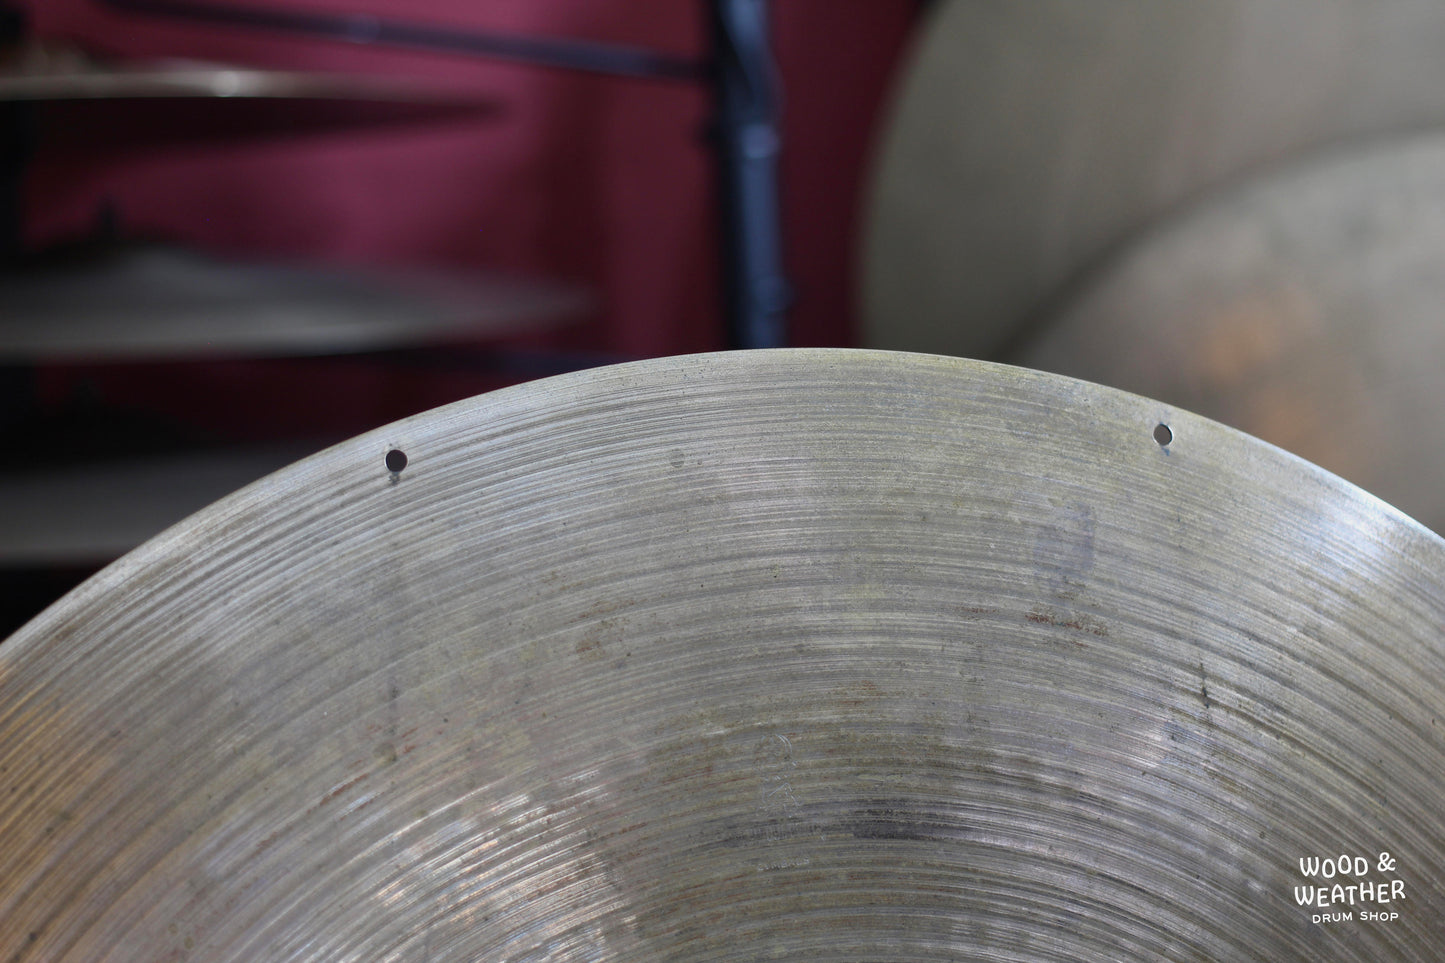 1970s A. Zildjian & Cie Constantinople 22" Gong Style Cymbal 3140g